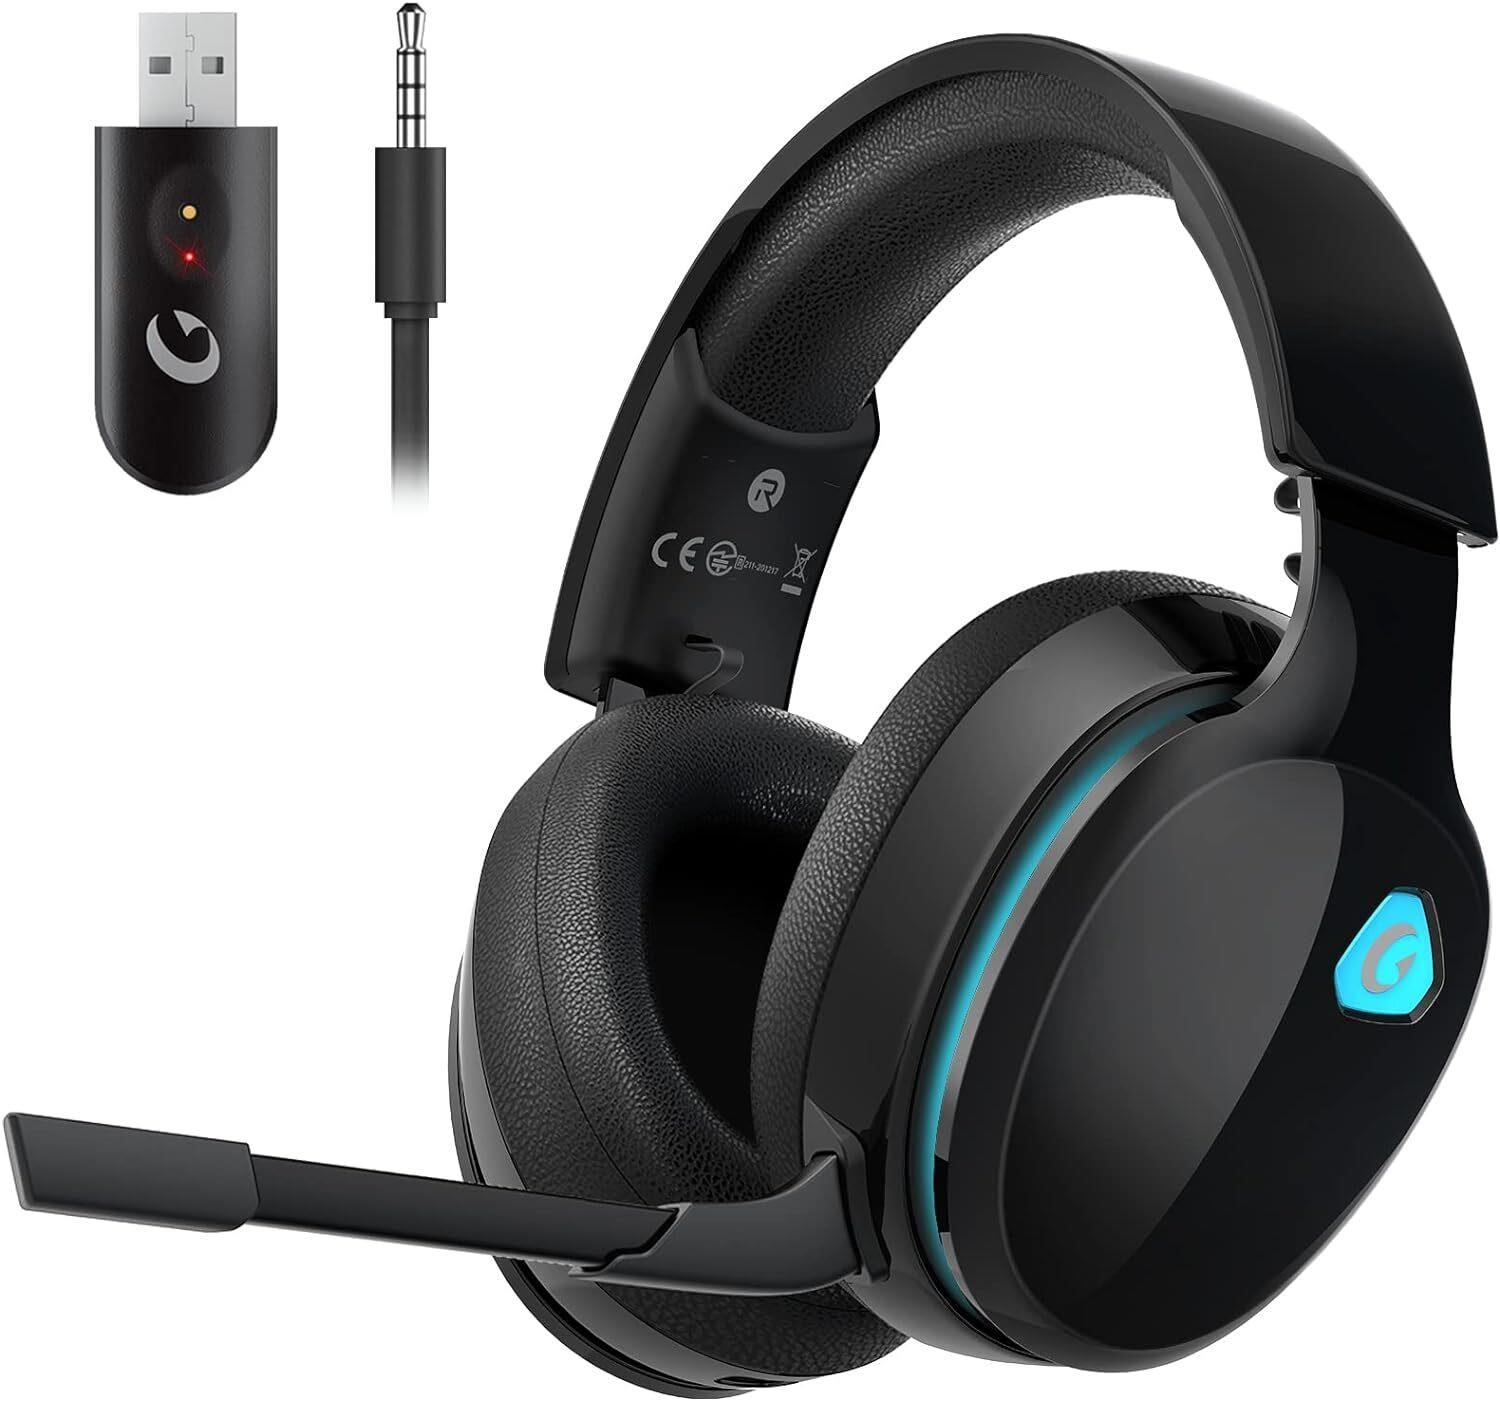 2.4GHz Wireless Gaming Headset for Gaming